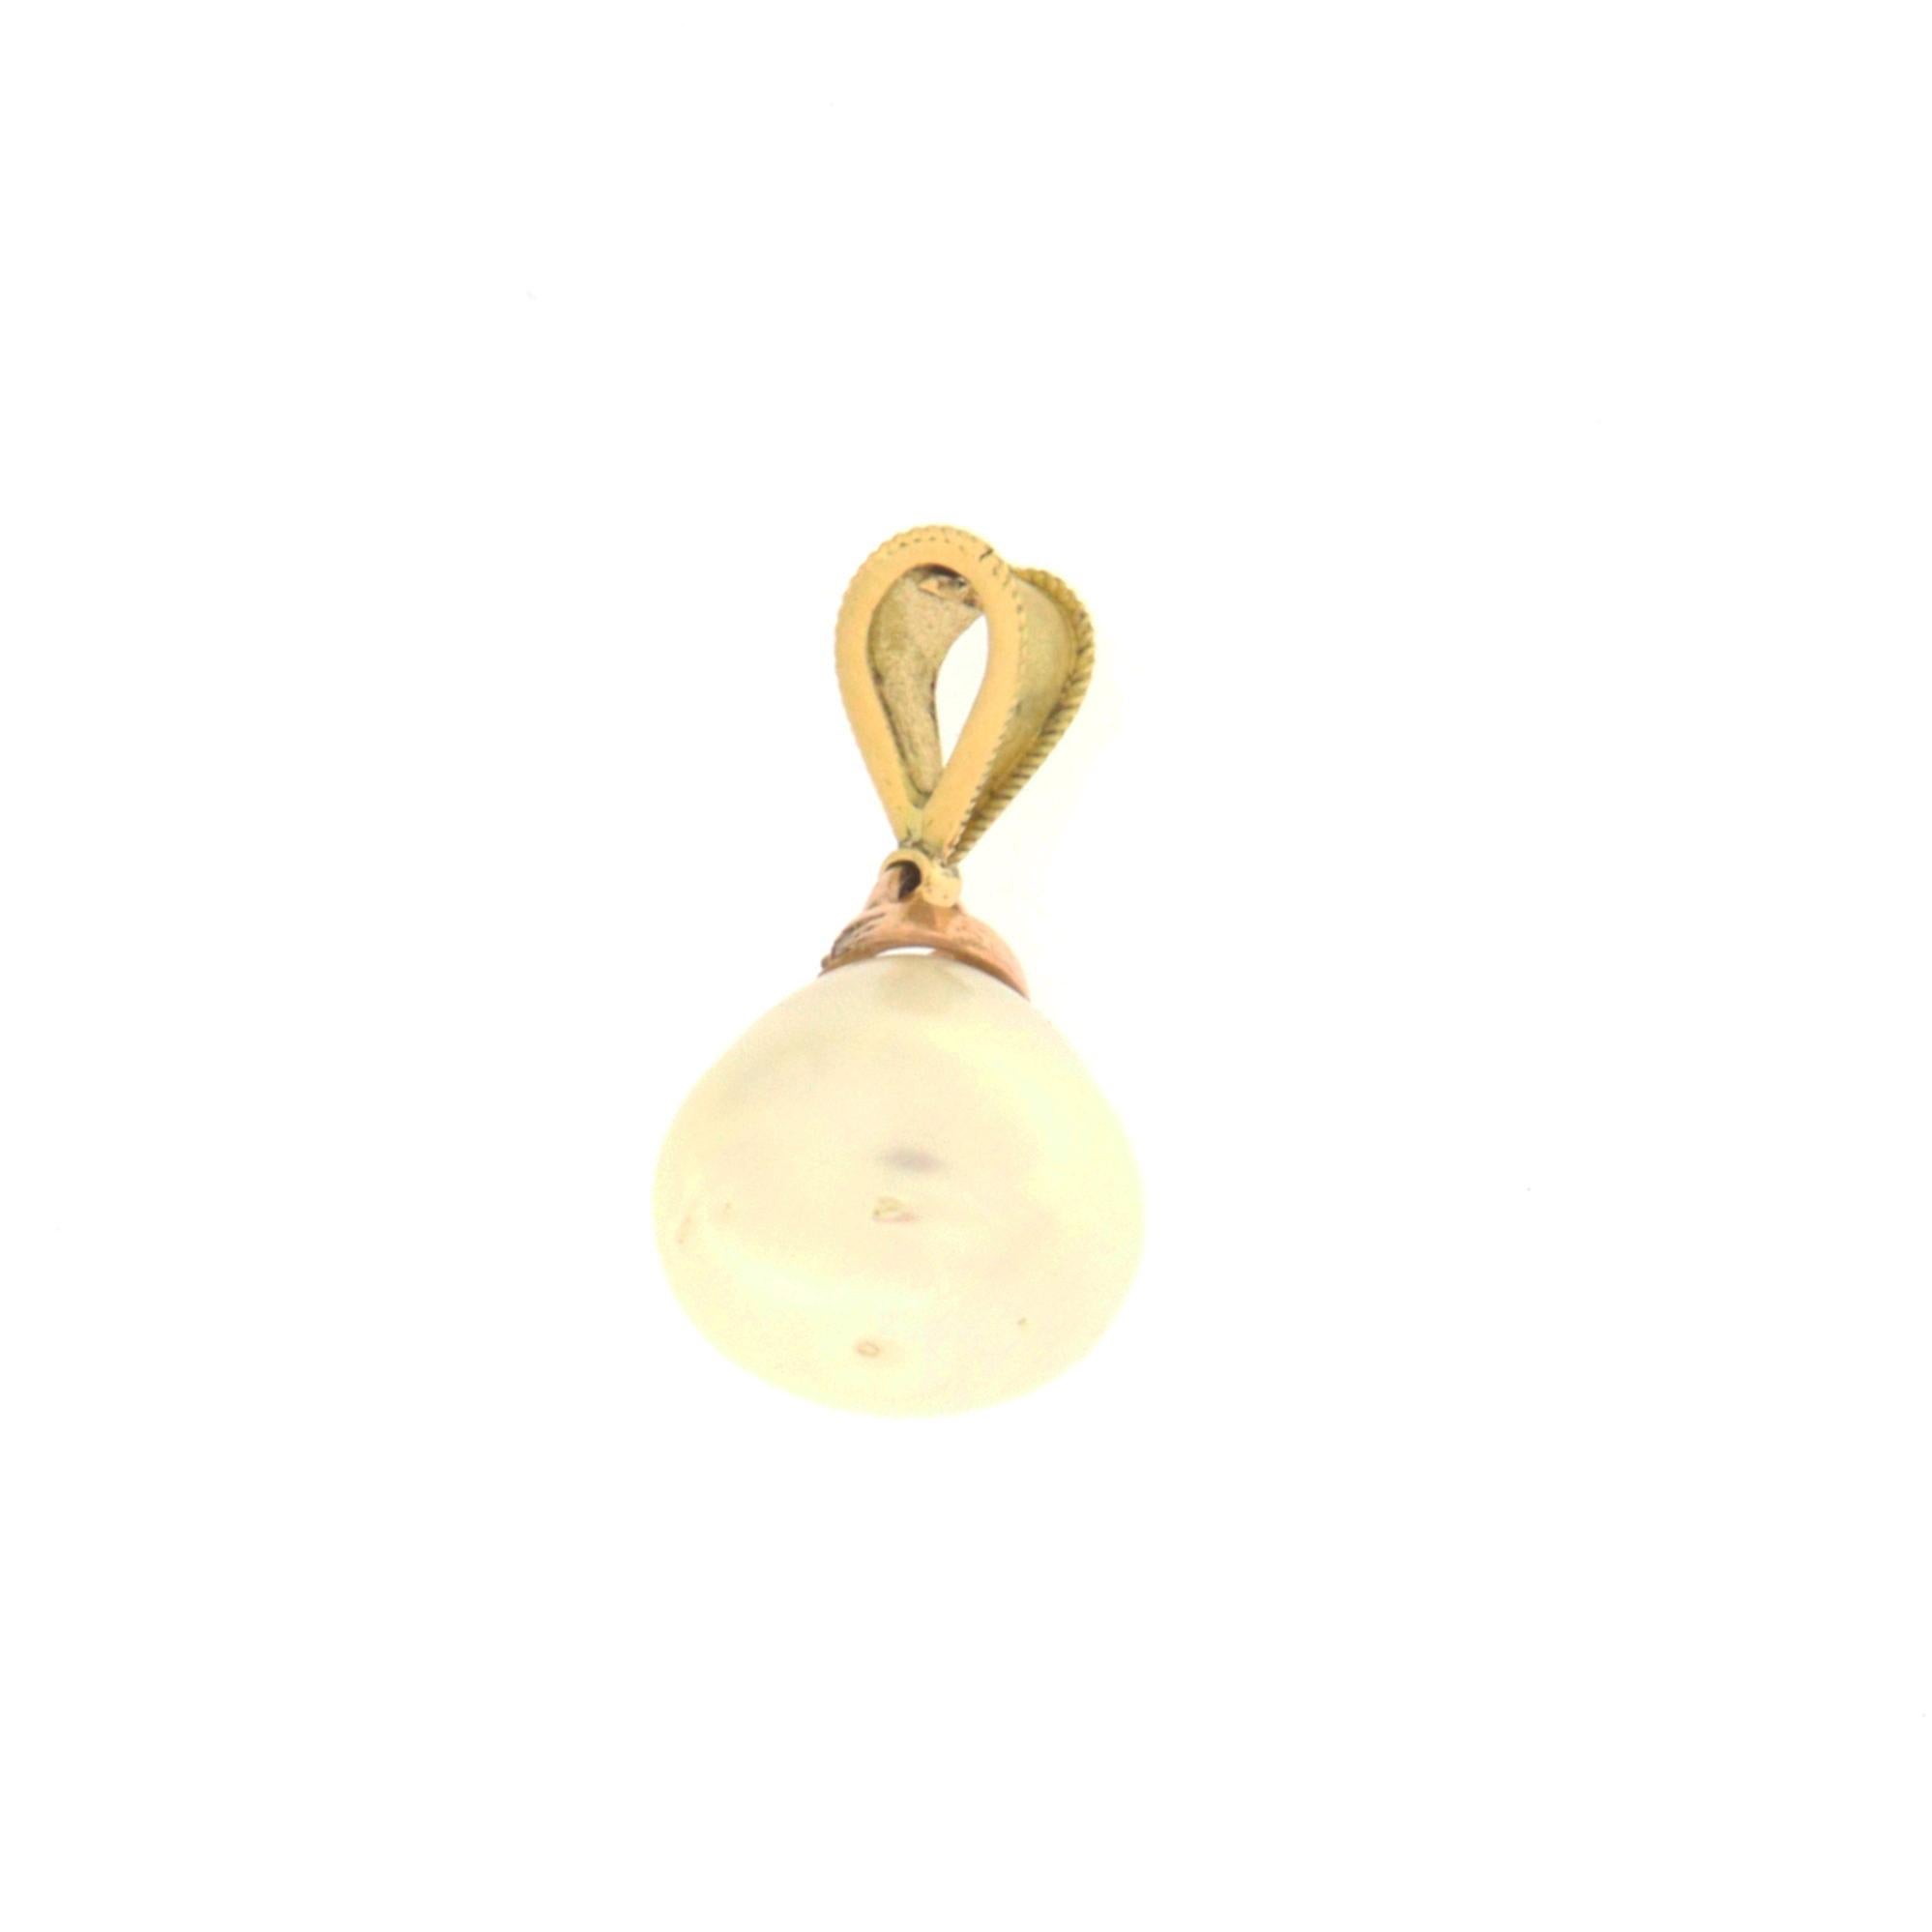 Beautiful 18 karat yellow gold pendant necklace.Handmade by our craftsmen assembled with diamonds and South Sea Pearl

Diamonds weight 0.05 karat
Necklace total weight 5.60 grams
Pearl size 14.69 mm
(chain is not included in the price)